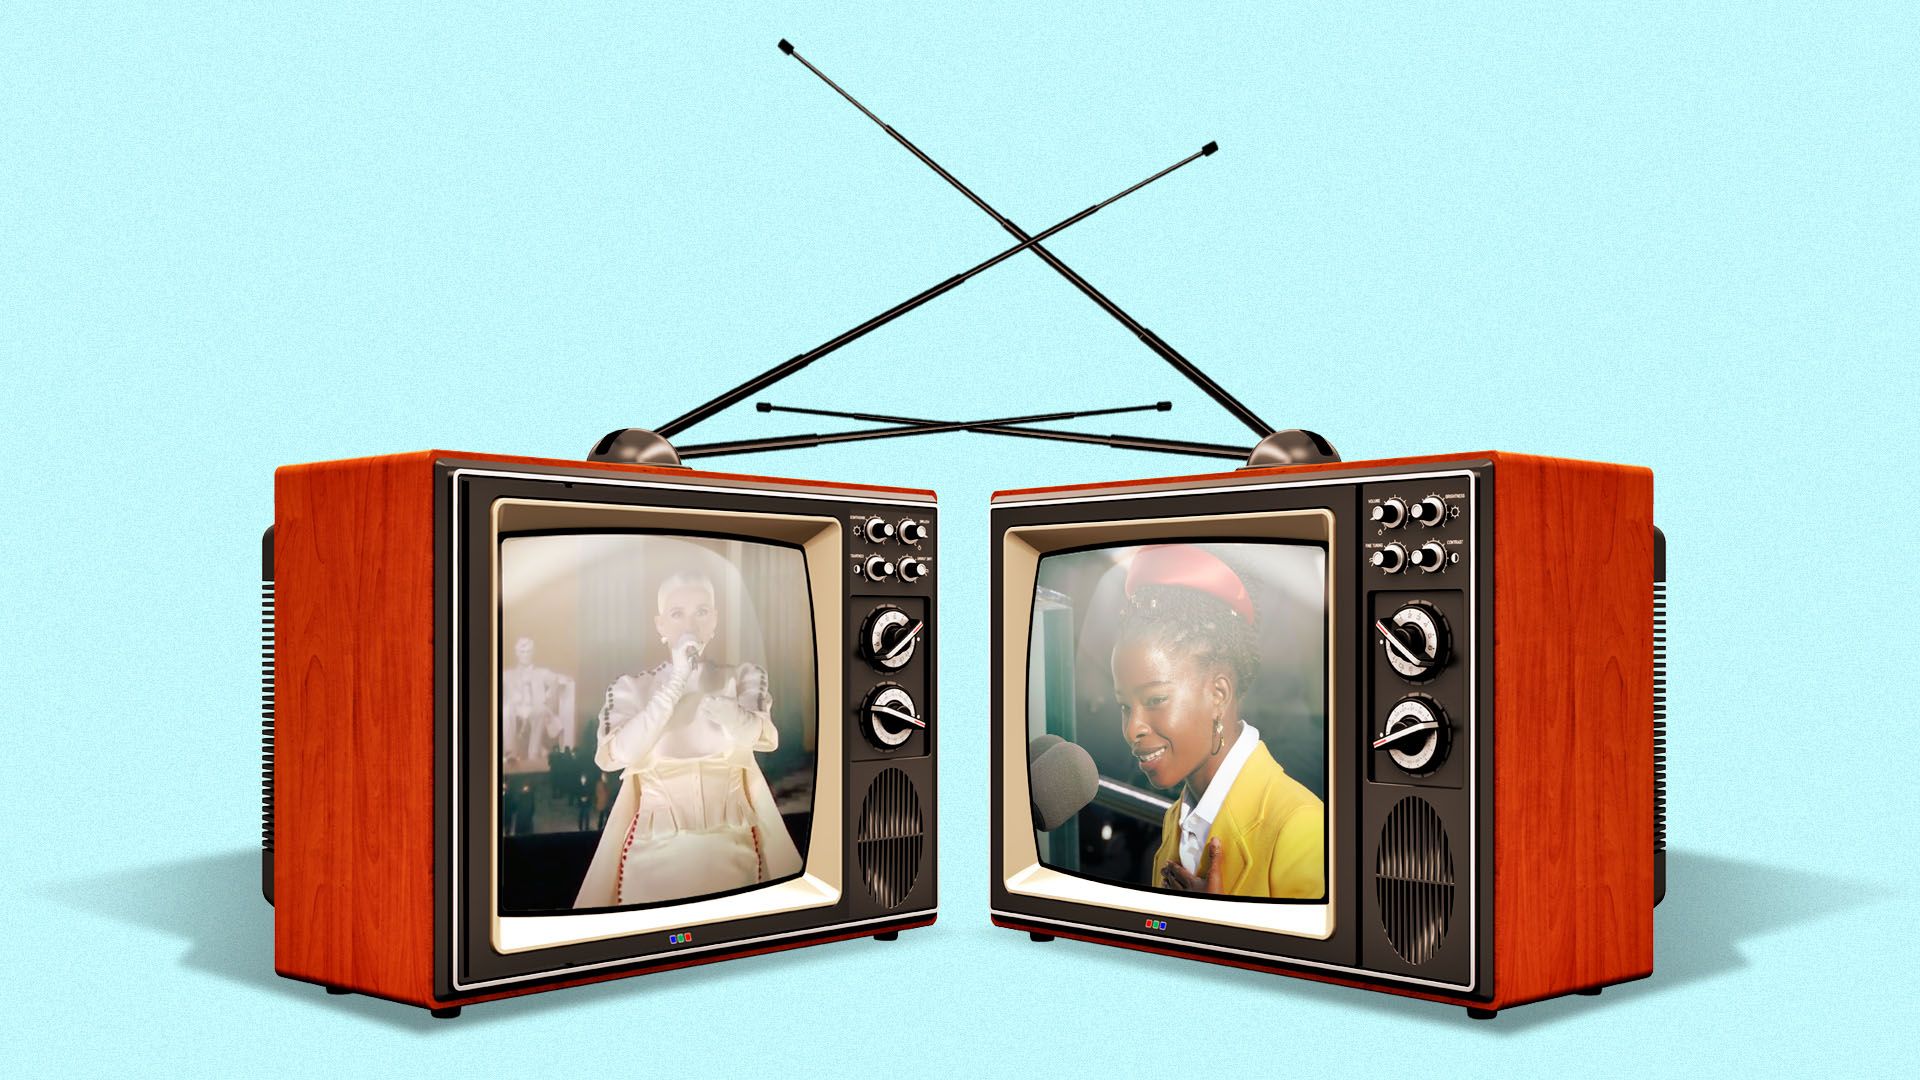 Photo illustration of two old fashioned televisions with intertwined antennas playing footage from the Inauguration